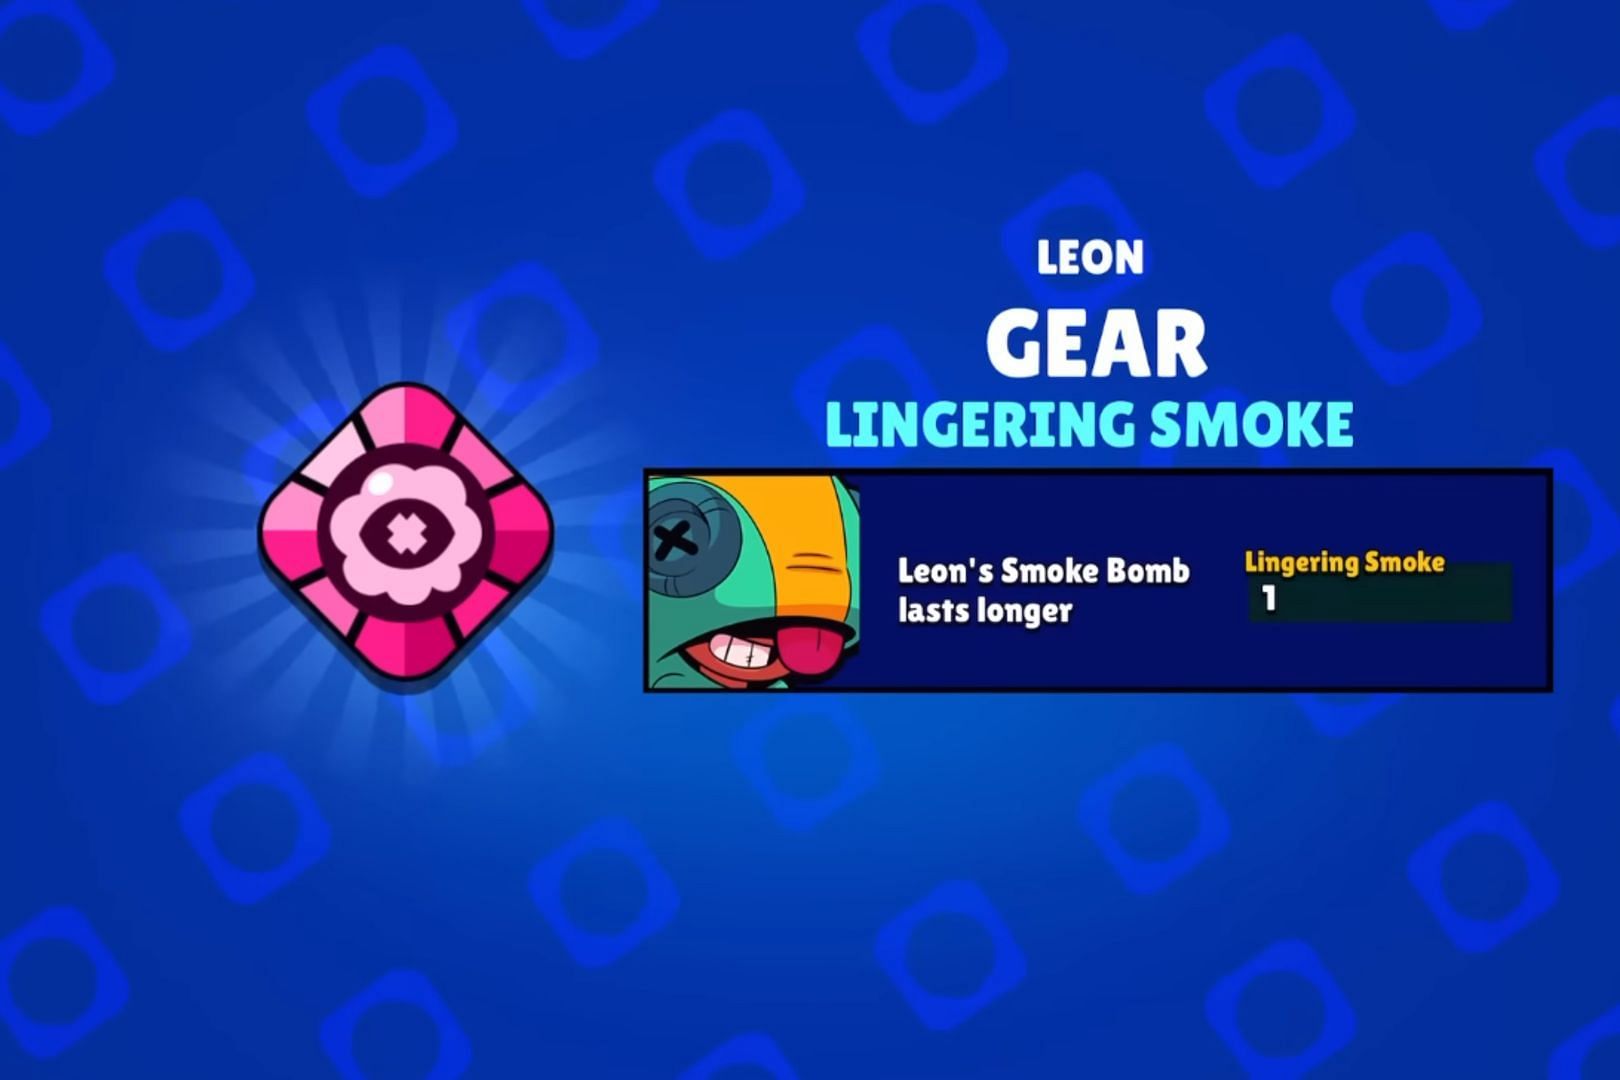 Lingering Smoke Mythic Gear (Image via Supercell)